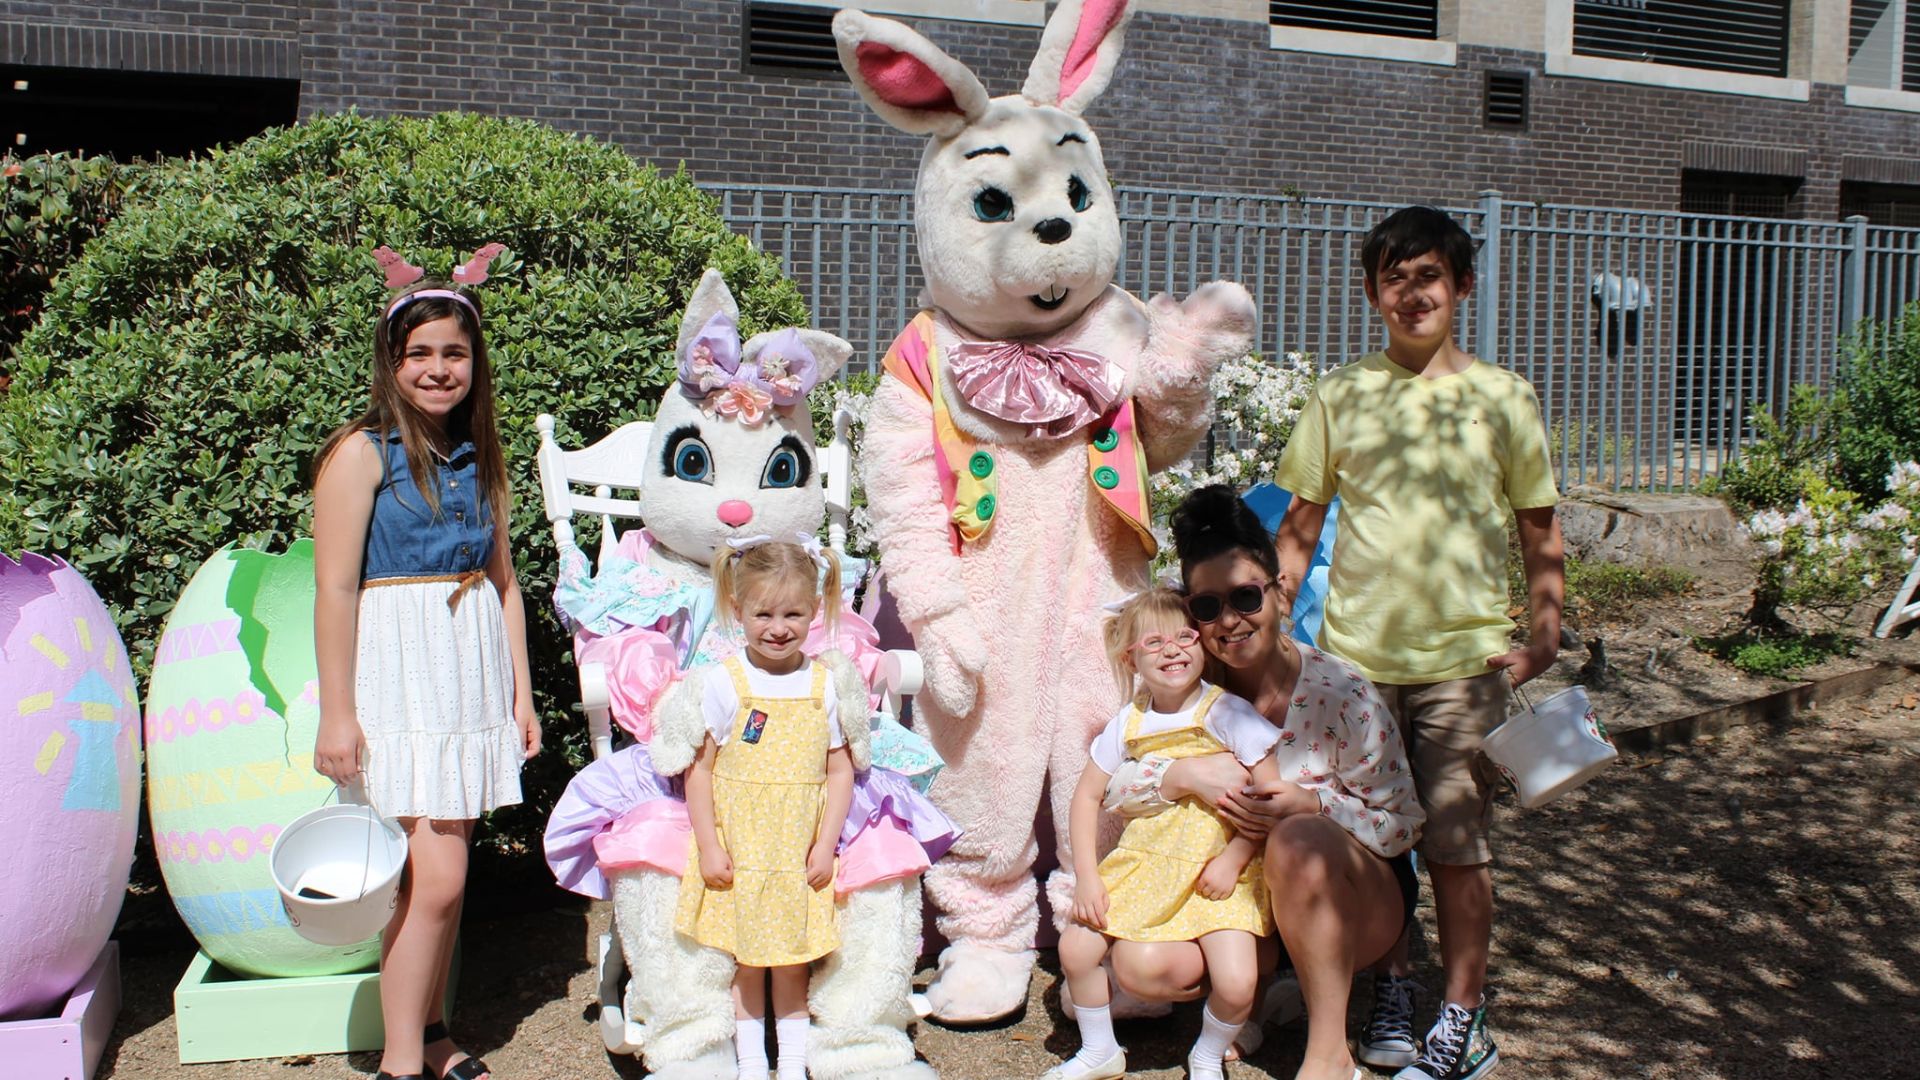 Four children and one adult are standing next to two people dressed up in Easter Bunny costumes posing with their Easter baskets.